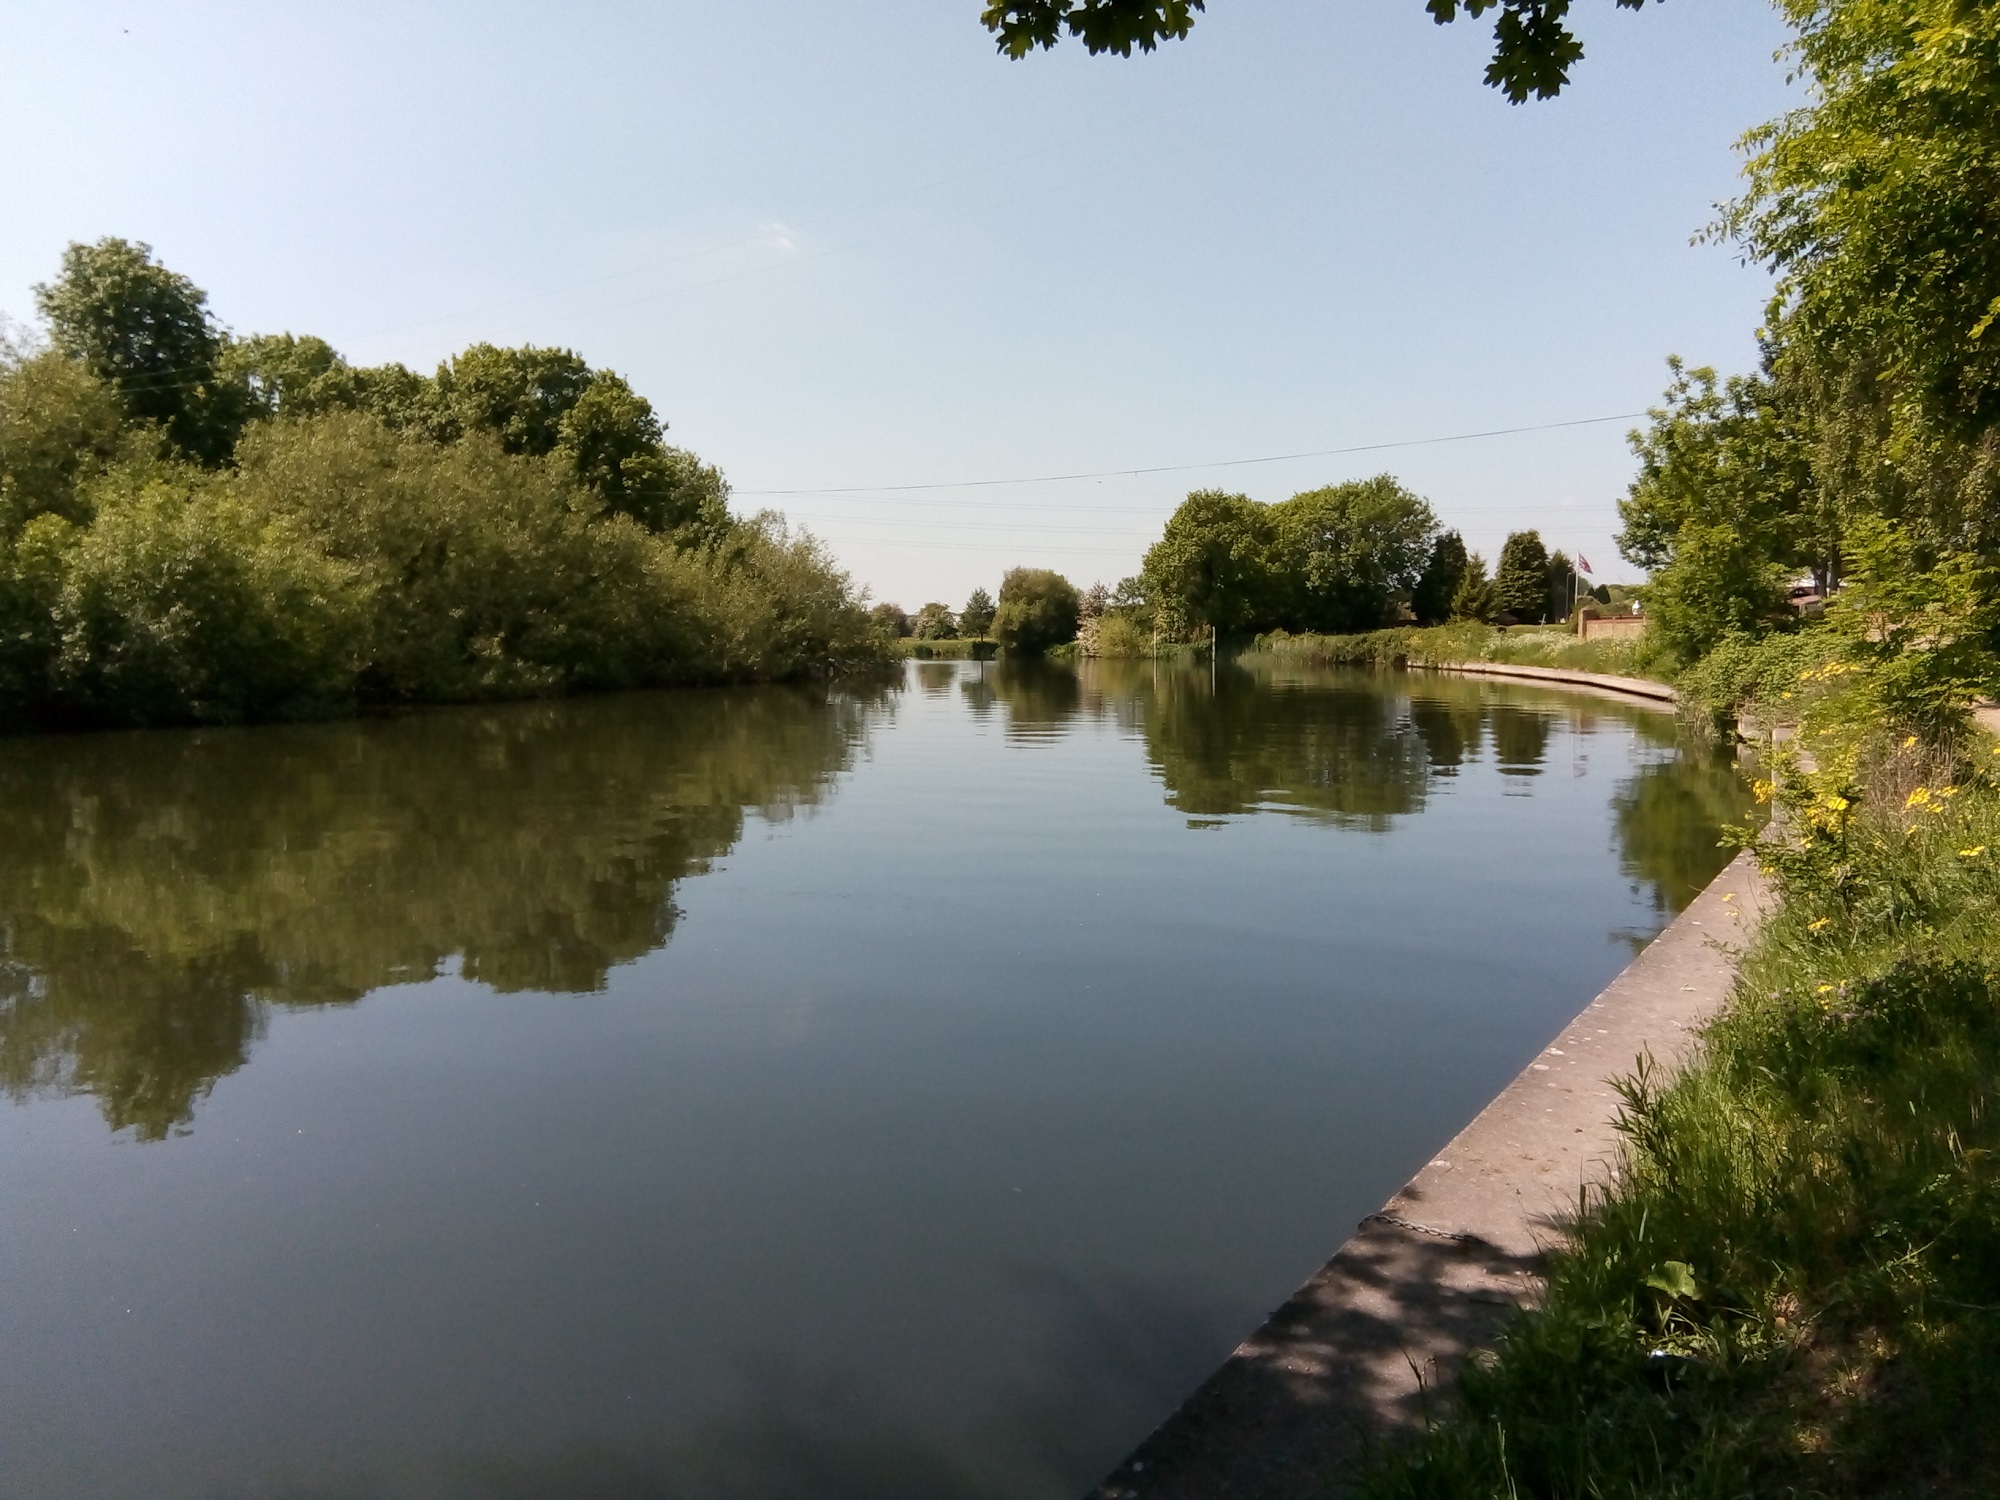 The River Thames viewed from the Middlesex side looking upstream on the outskirts of Chertsey. The river is calm and flat on a hot still sunny day.